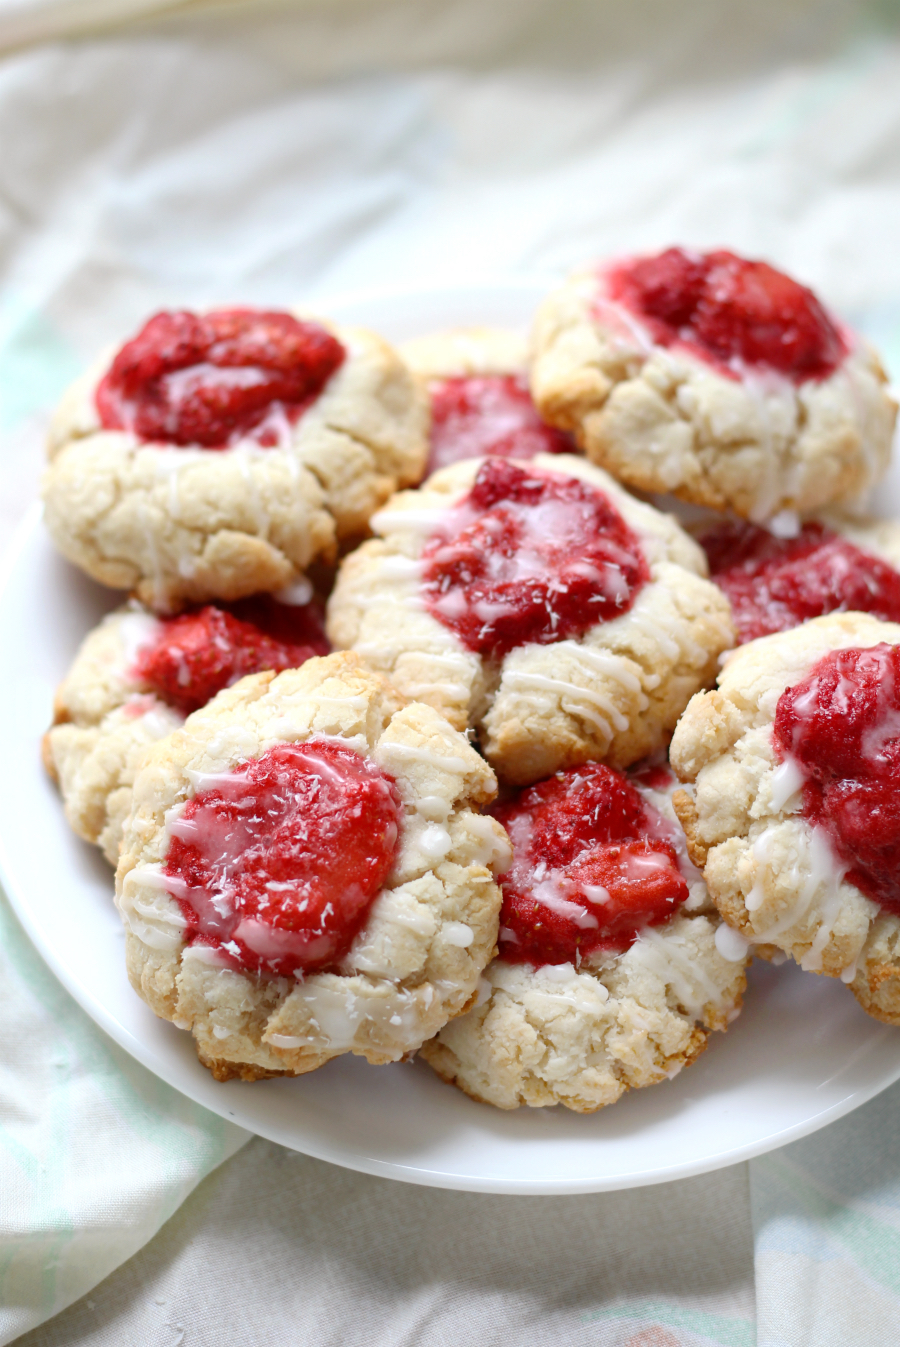 Paleo Strawberry Coconut Thumbprint Cookies (Gluten-Free, Vegan) | Strength and Sunshine @RebeccaGF666 Celebrate the Spring with a batch of Paleo Strawberry Coconut Thumbprint Cookies that are gluten-free, vegan, and grain-free! A fruity dessert recipe you'll be baking up beyond the season! ad 